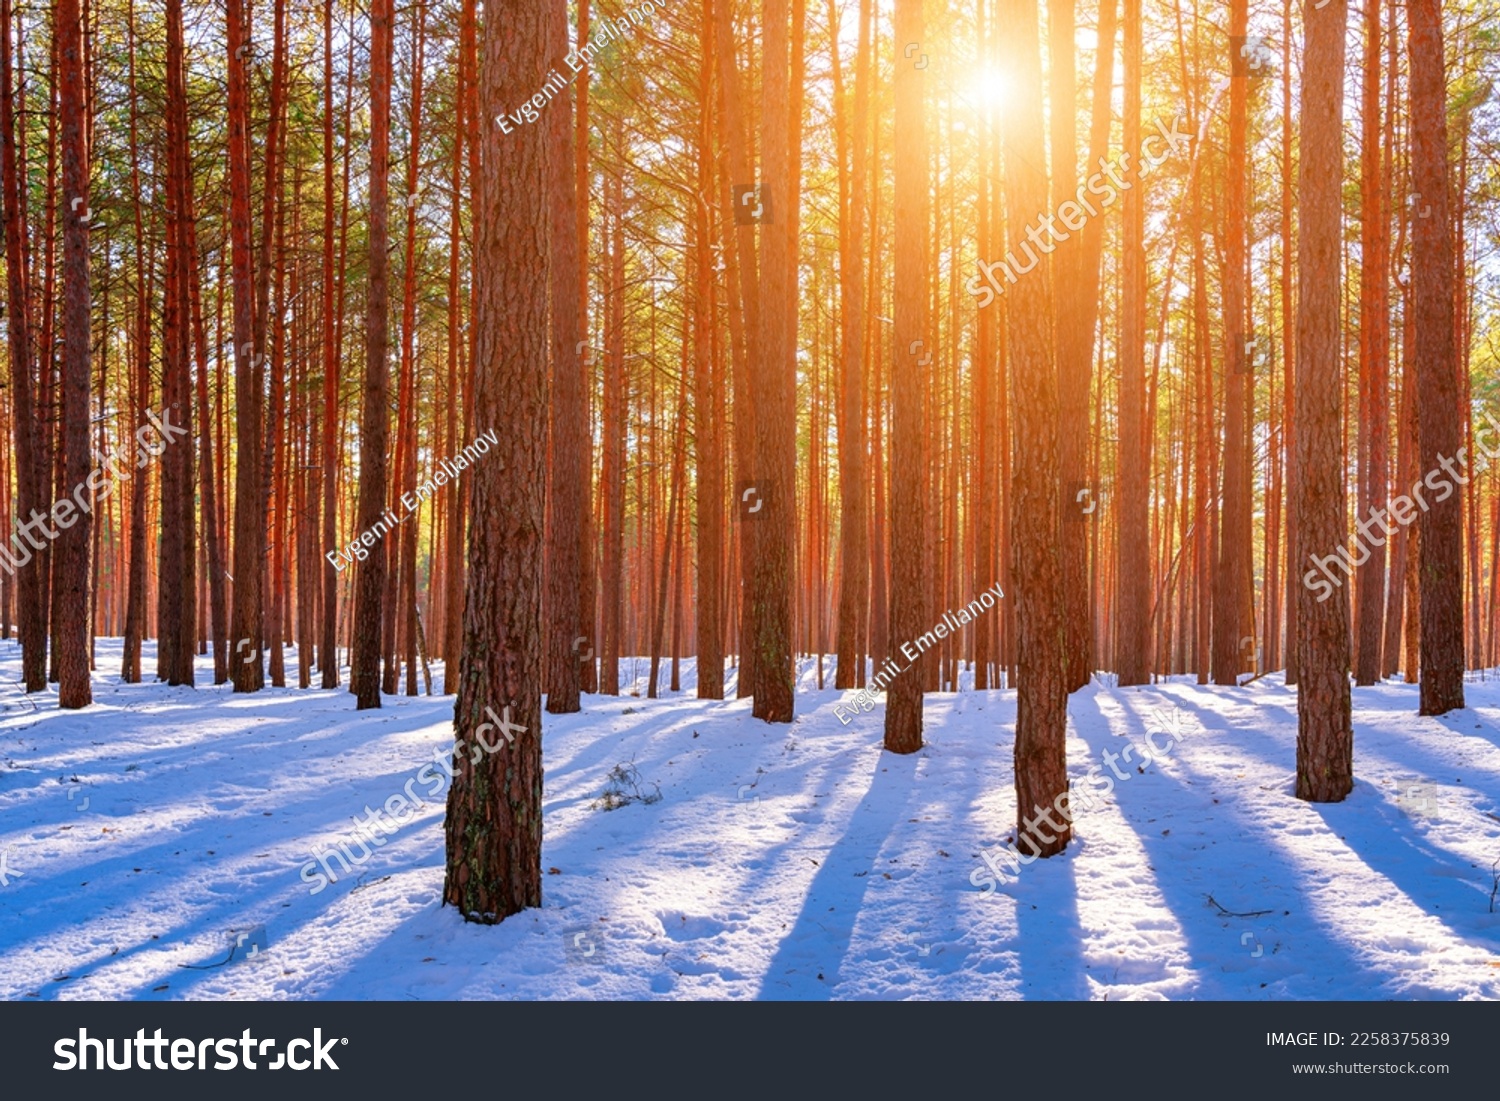 Sunset or sunrise in the spring pine forest covered with a snow. Sunbeams shining through the pine trunks. #2258375839